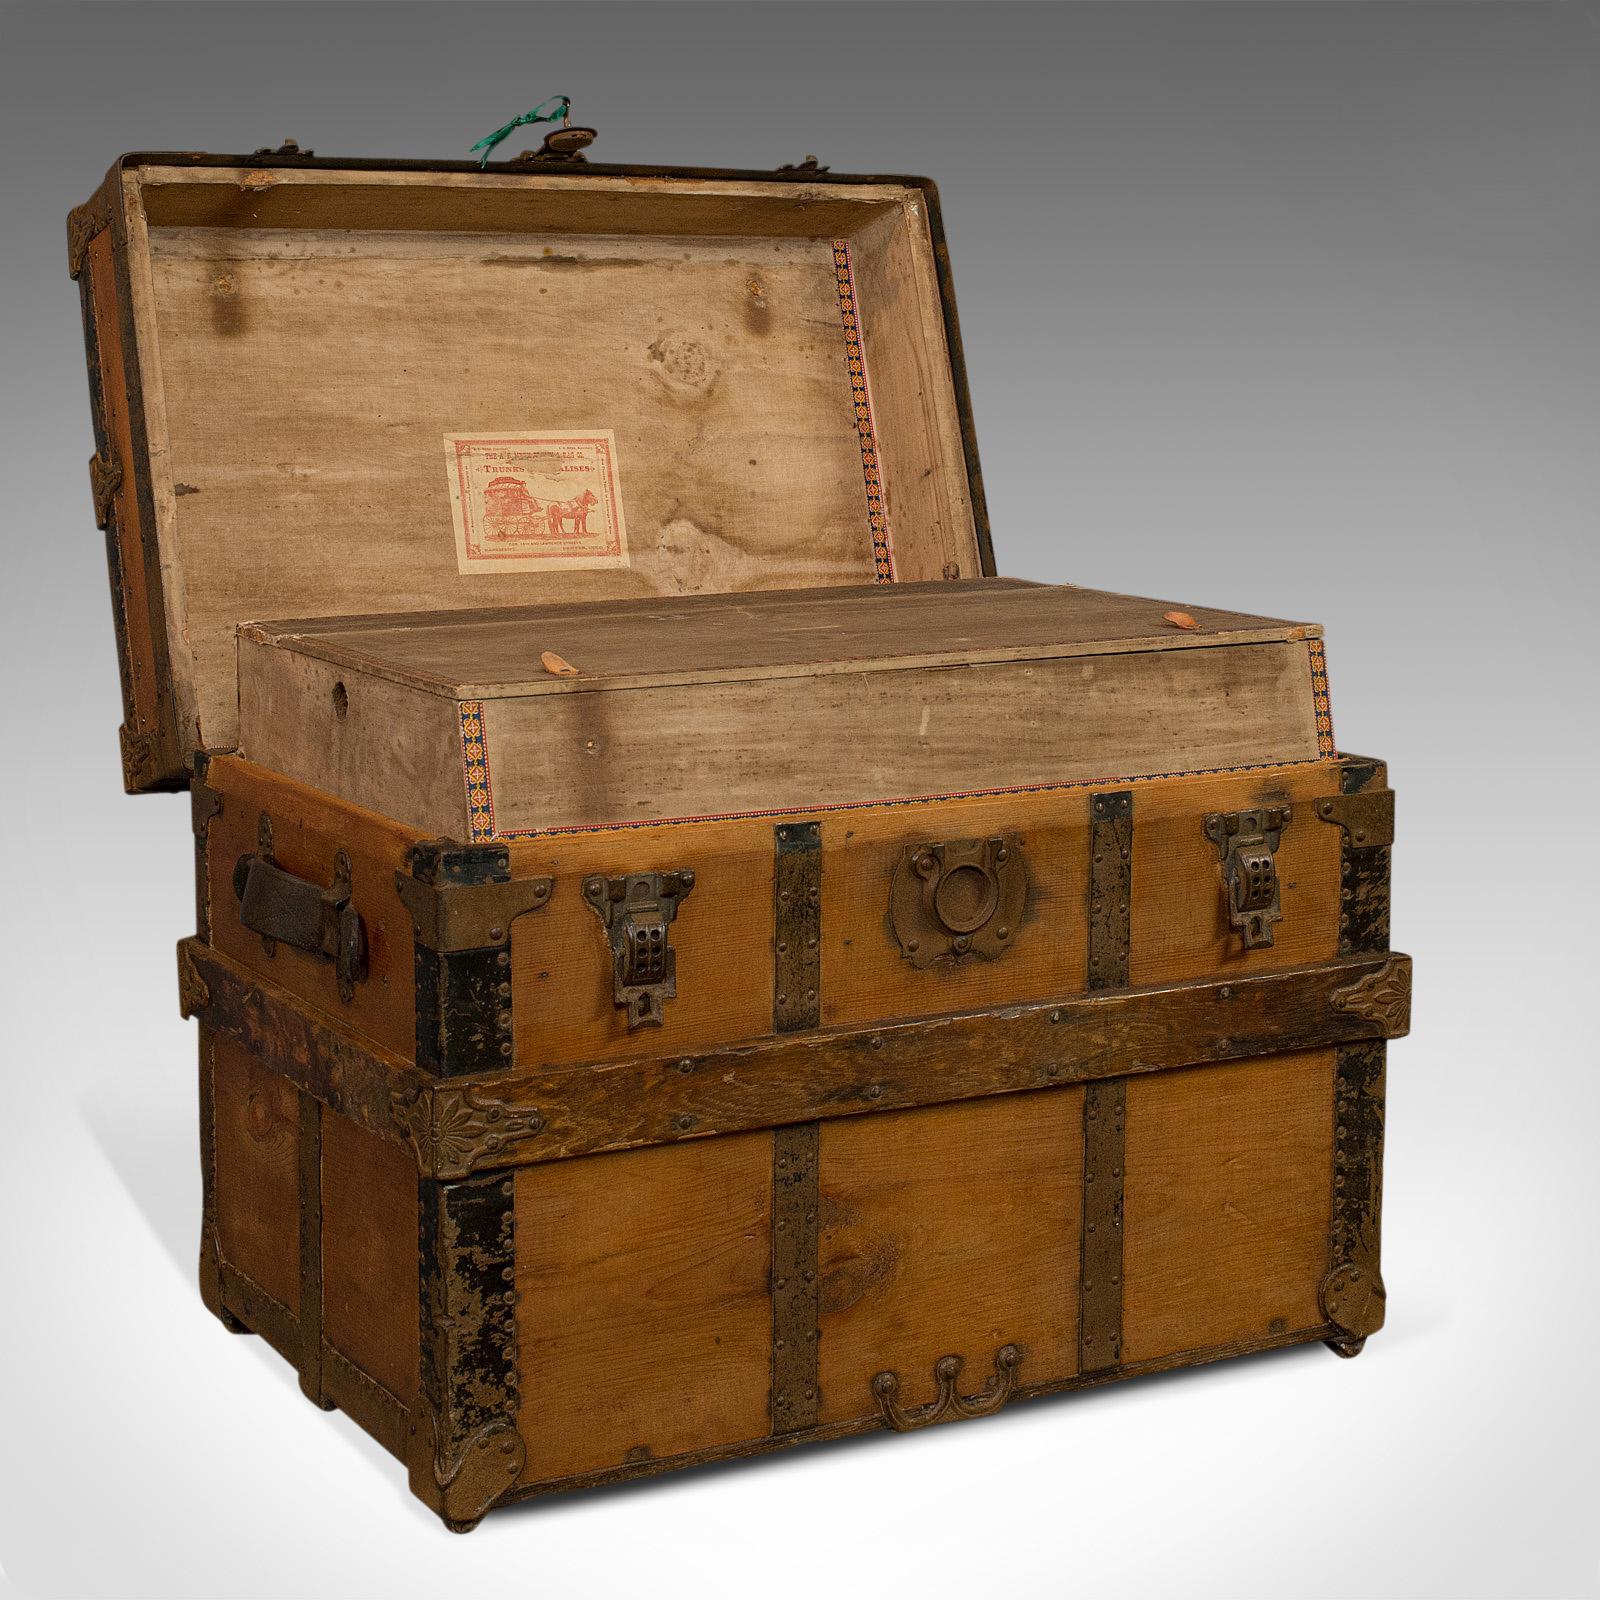 This is an antique carriage trunk. An American, spruce chest by A.E. Meek of Colorado and dating to the late 19th century, circa 1890.

Period Western appeal with bountiful charm
Displays a desirable aged patina and original order
Stocks of